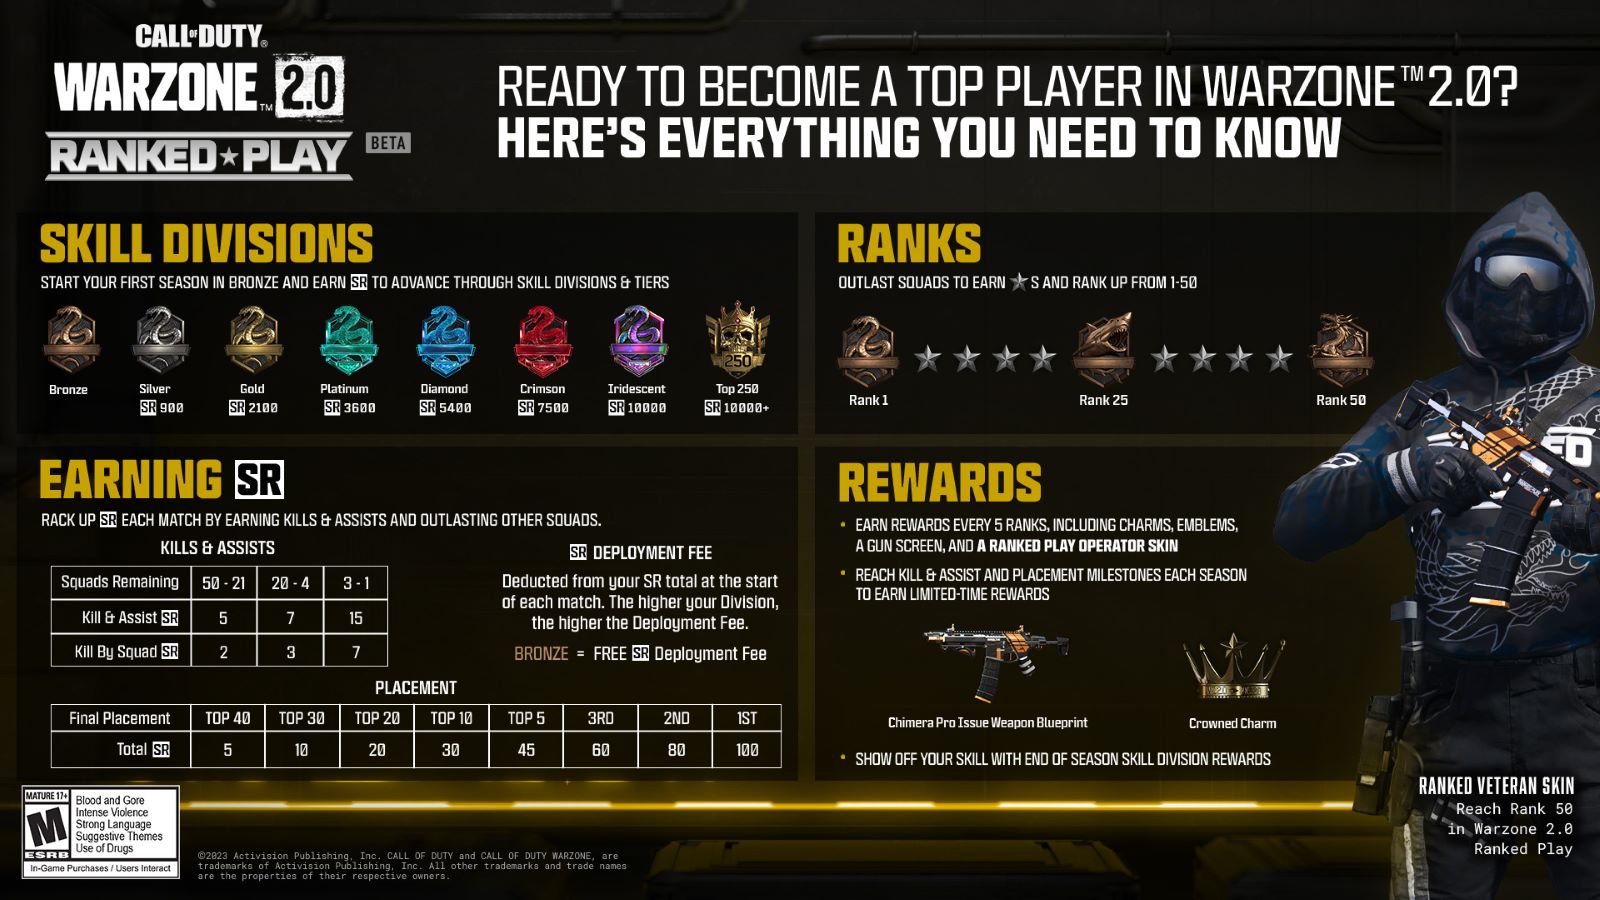 Warzone ranked poised for Season 3 launch